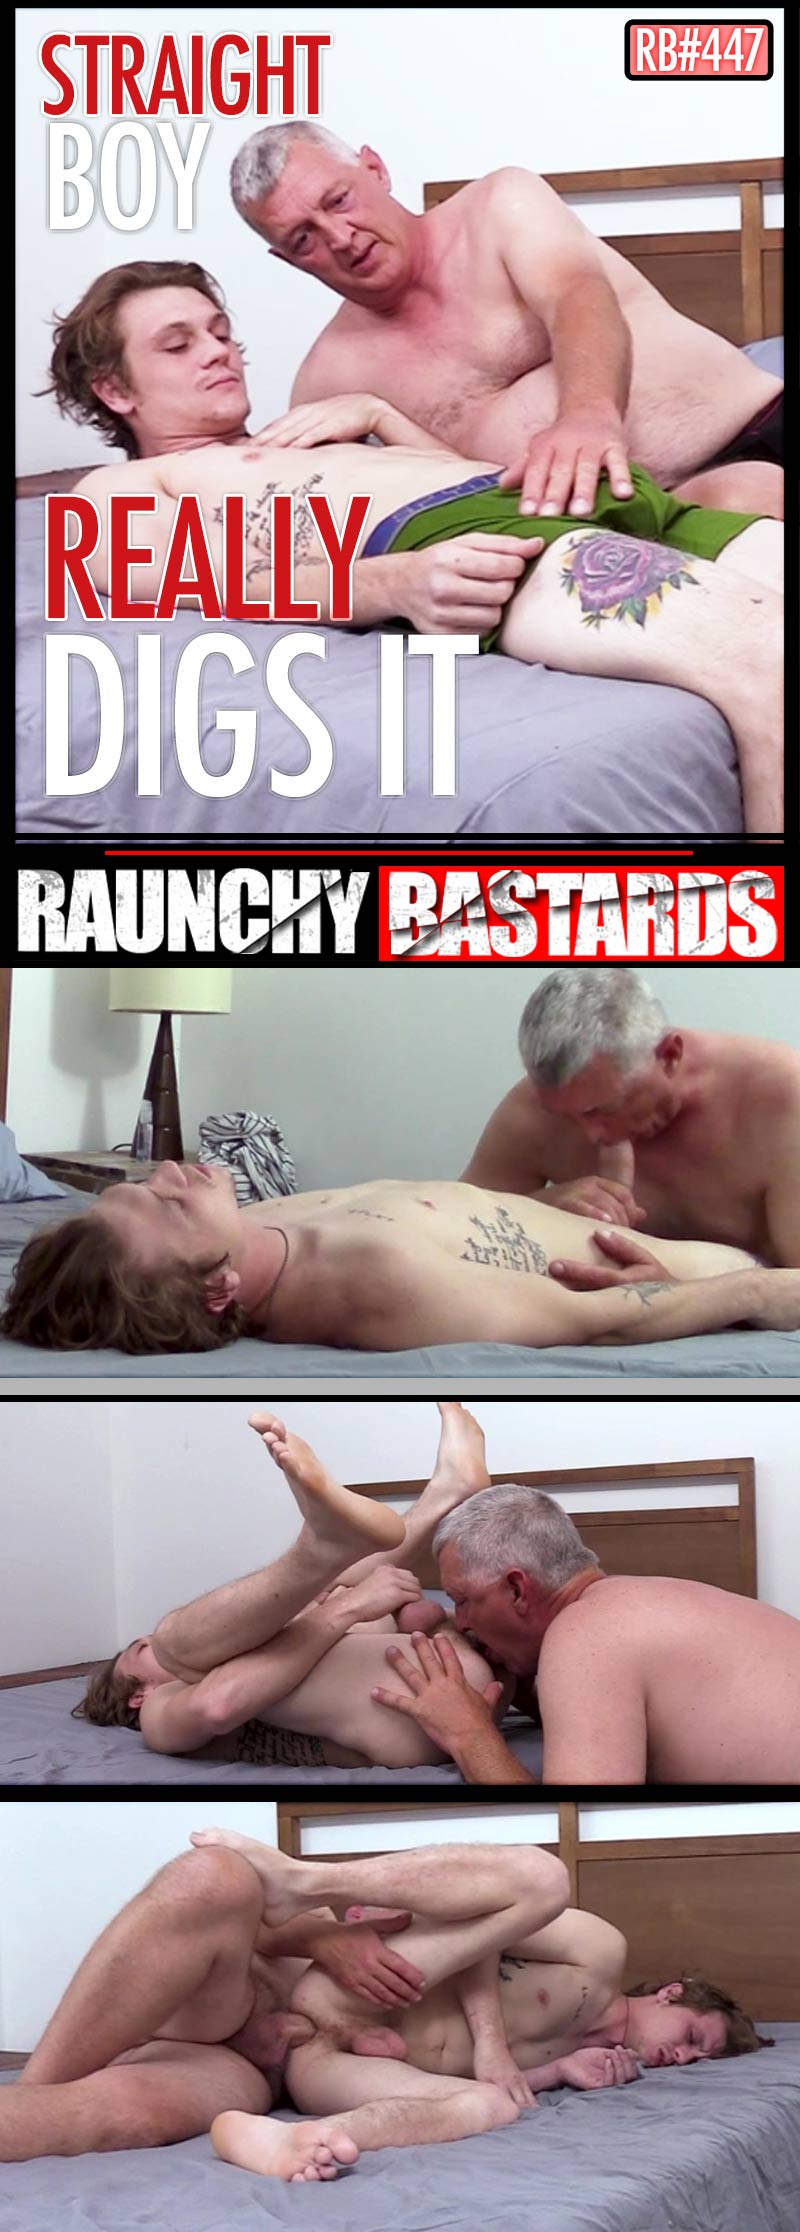 Episode #447: Clay Fucks Levi Brooks in 'Straight Boy Really Digs It' at Raunch Bastards